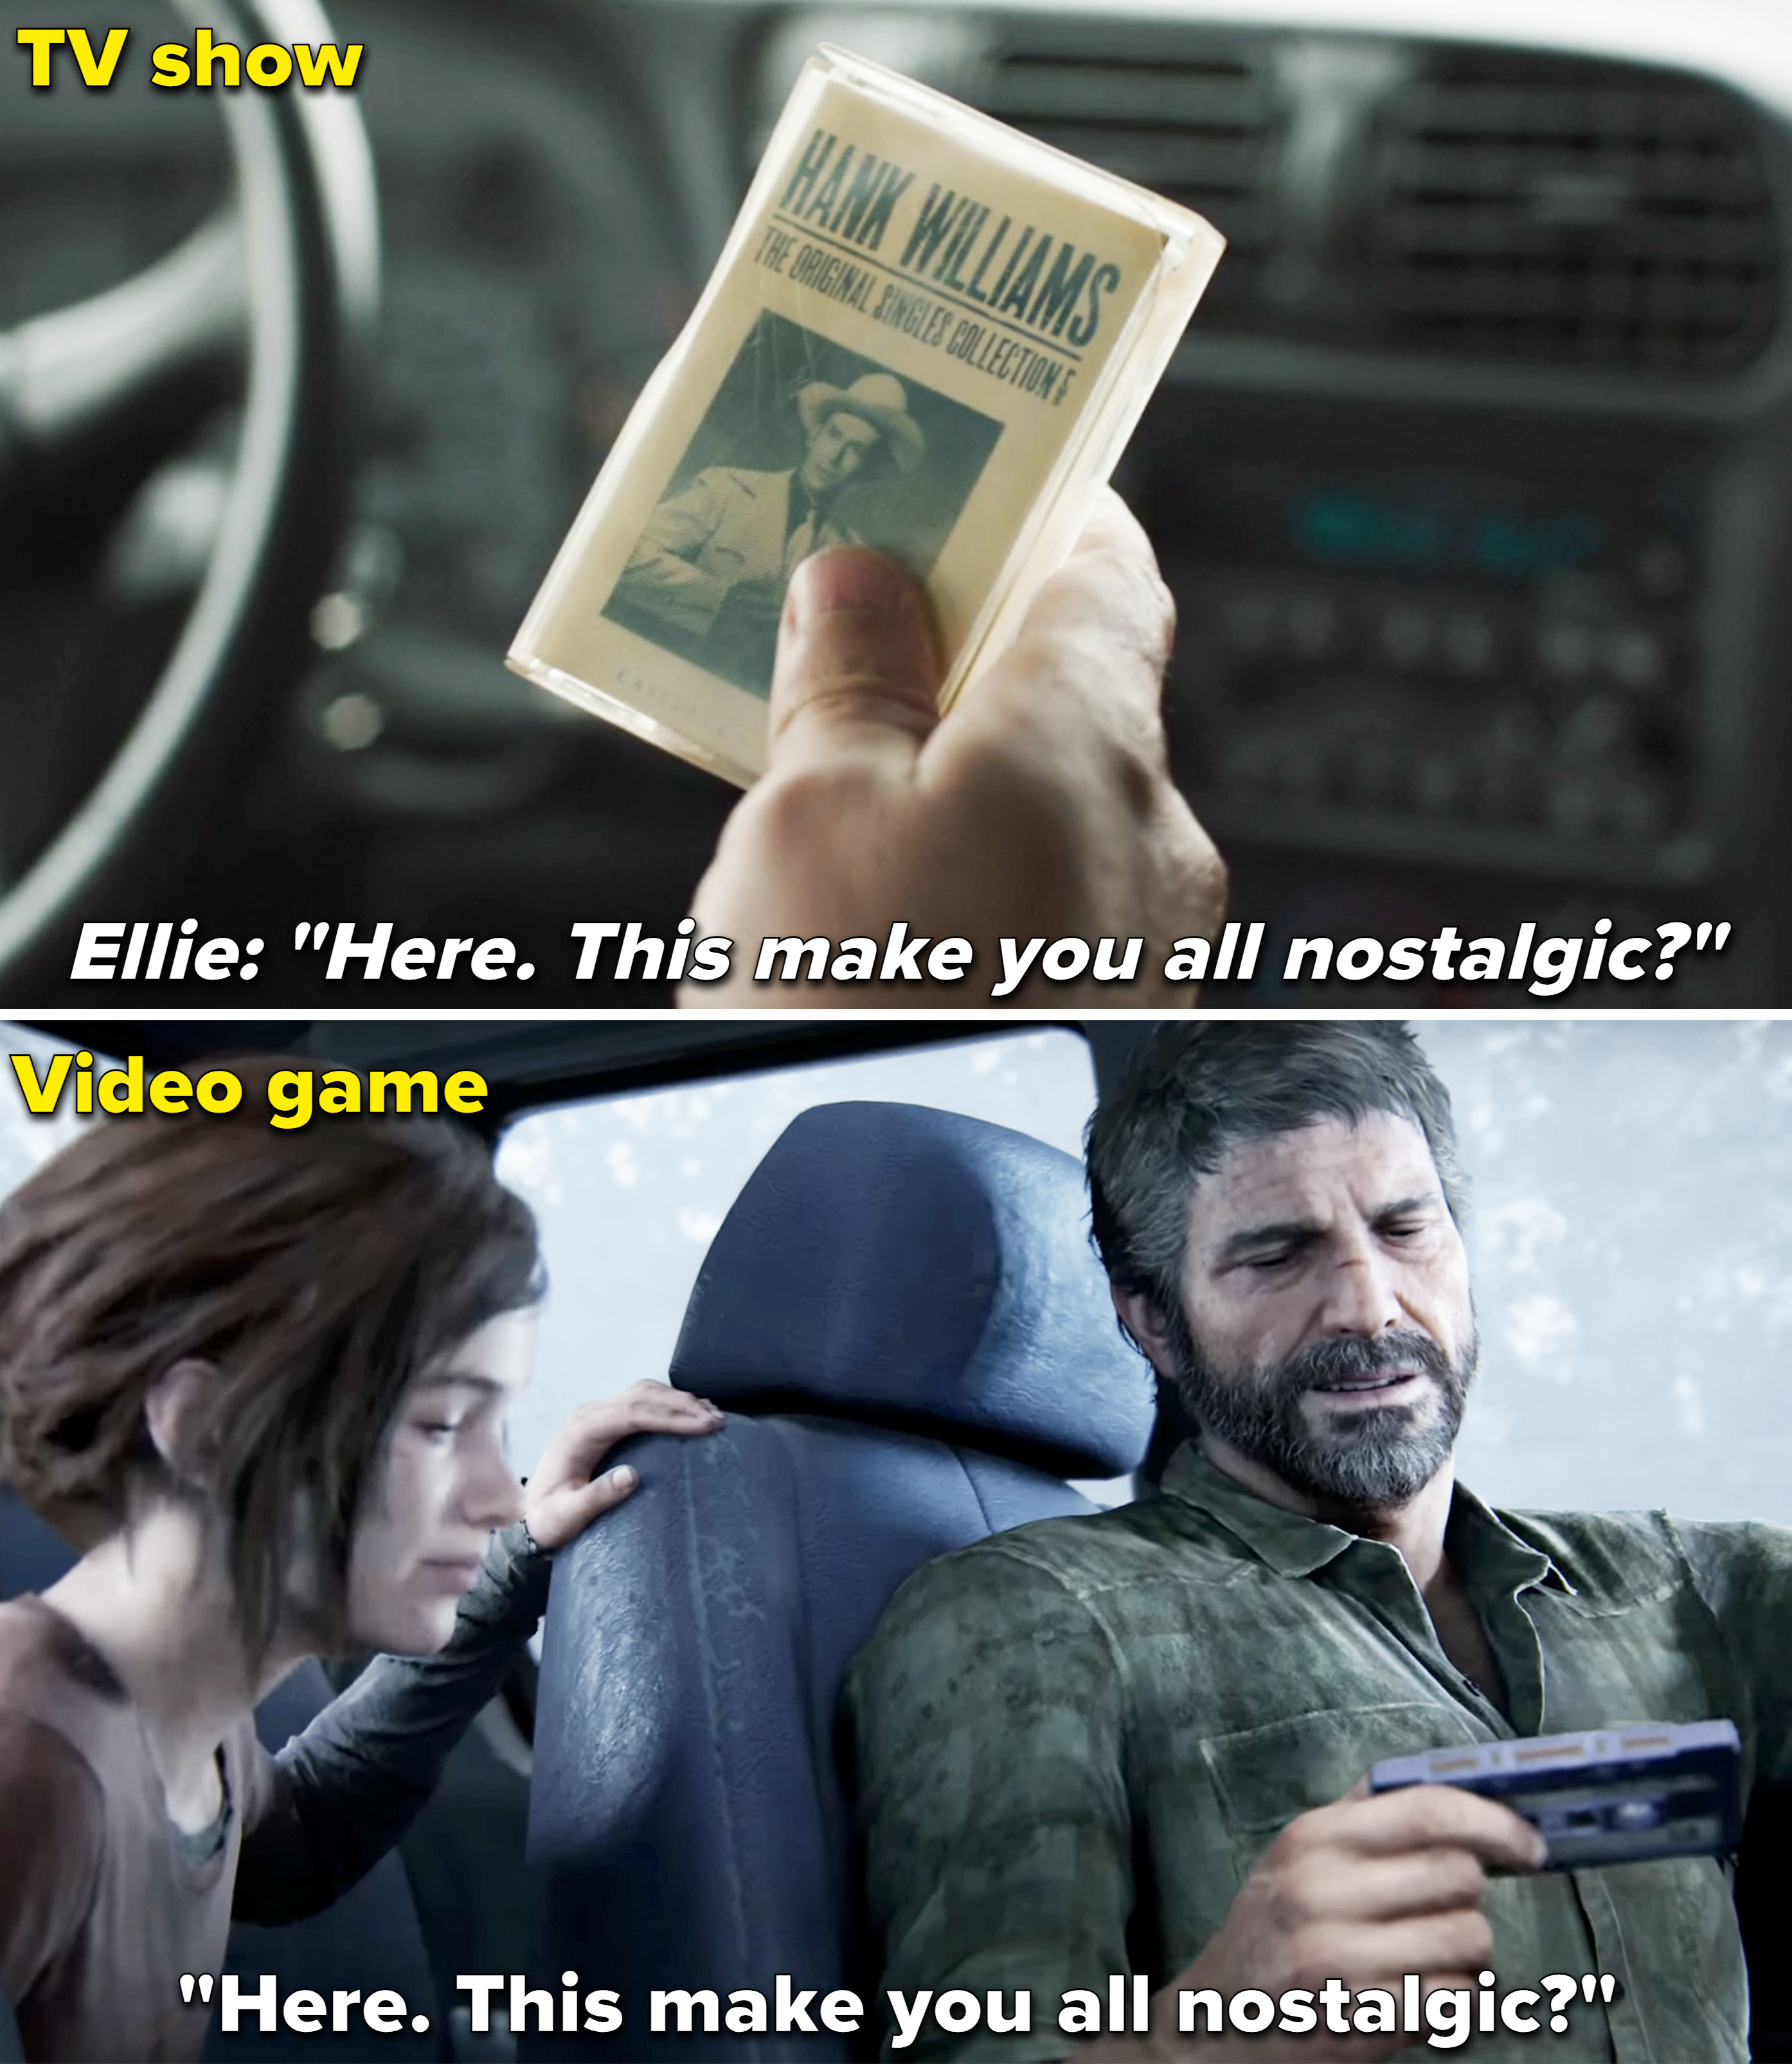 Ellie handing Joel a cassette tape of Hank Williams and asking if it makes him nostalgic in the show vs game